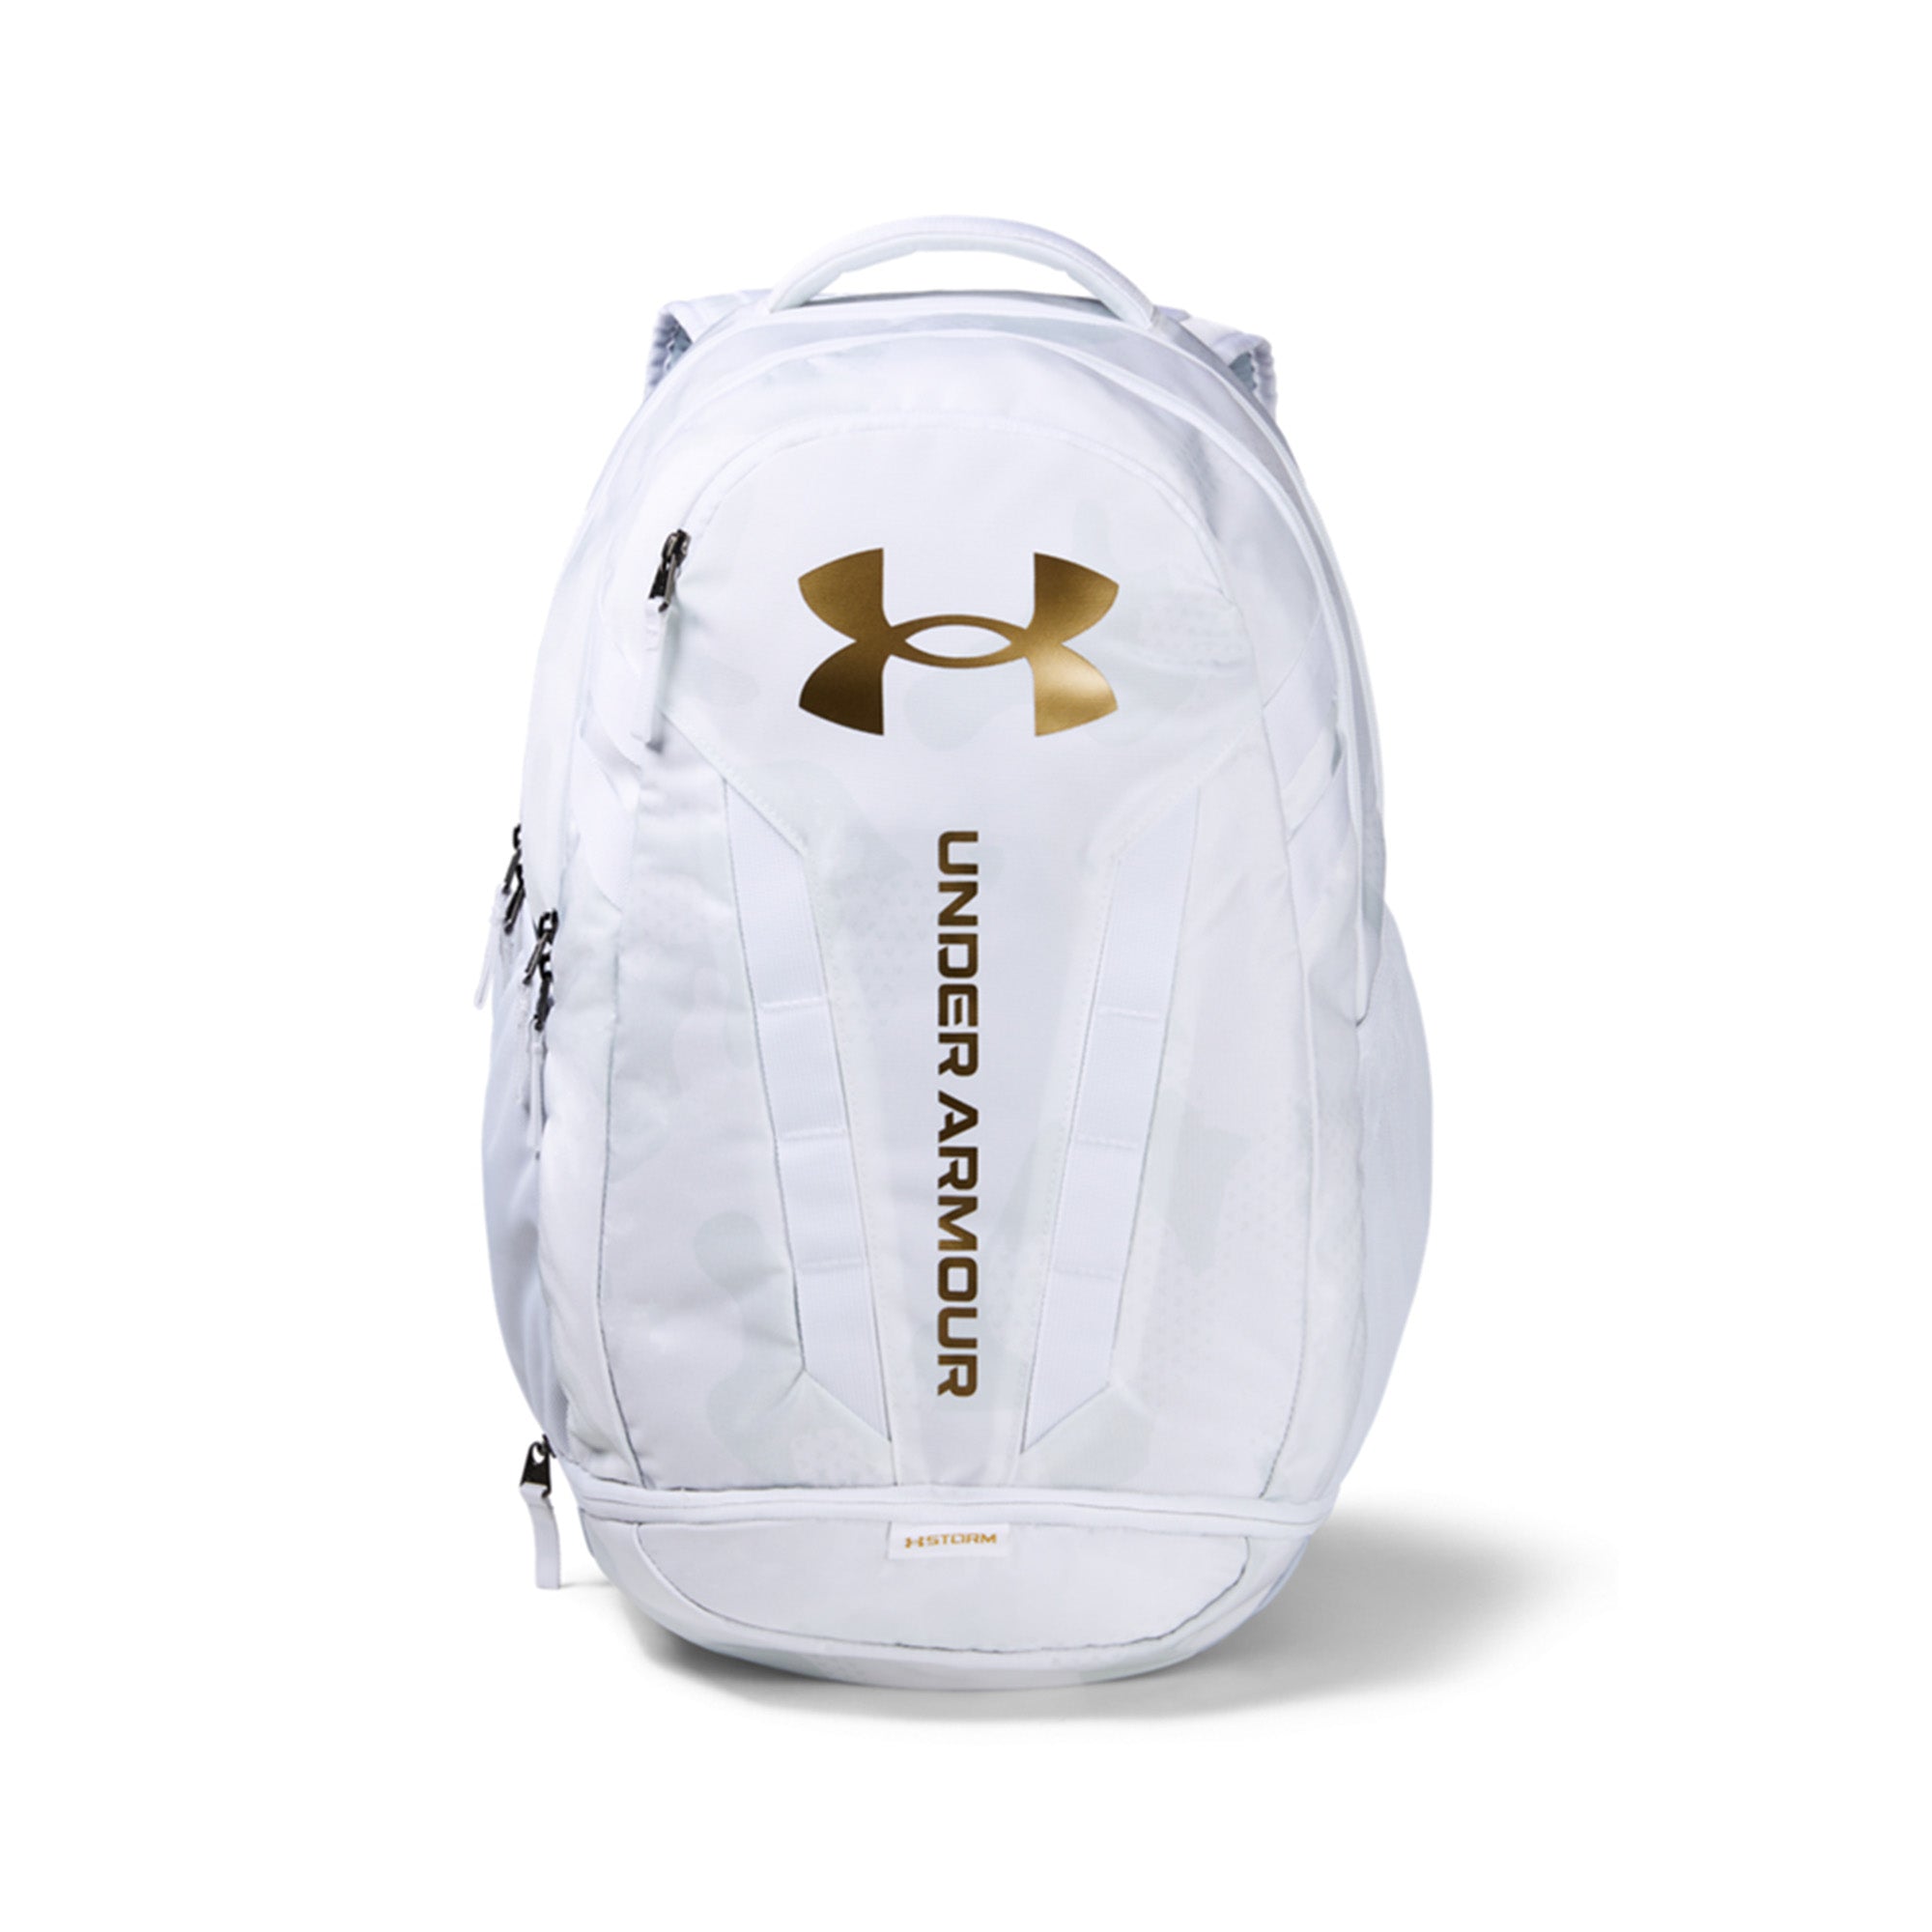 Under Armour Hustle 5.0 Backpack 1361176 White Mod Grey 101 & Function18